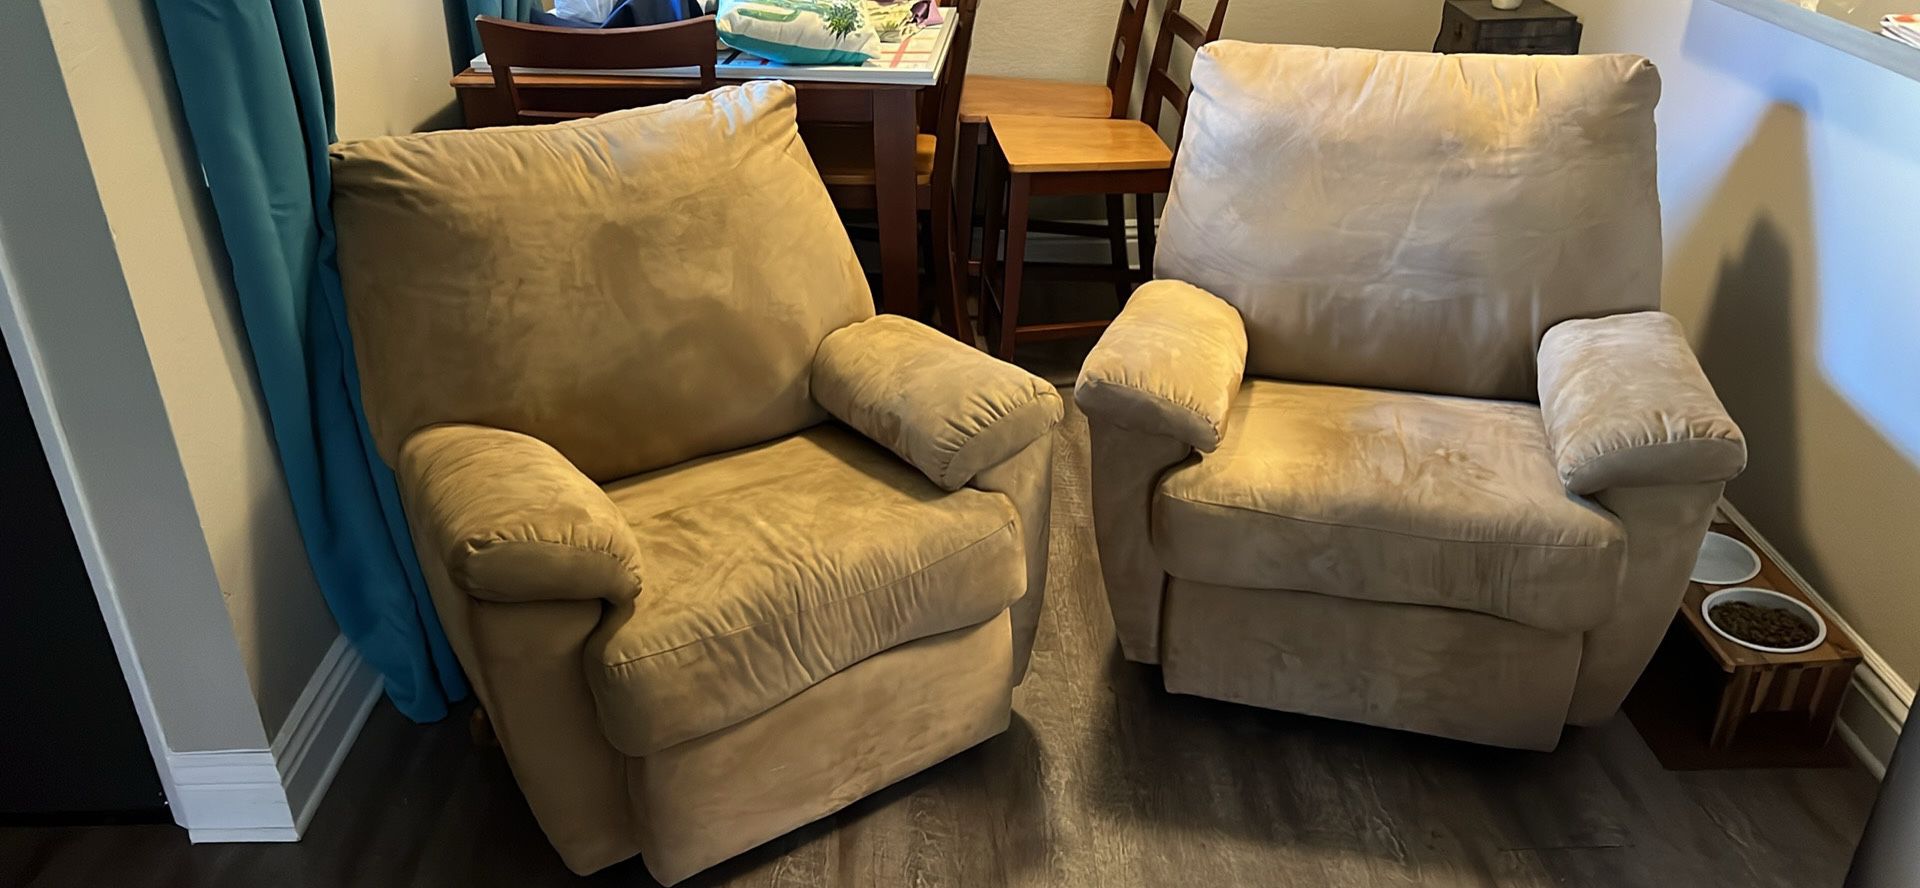 Dual Barcaloungers Recliner Chairs